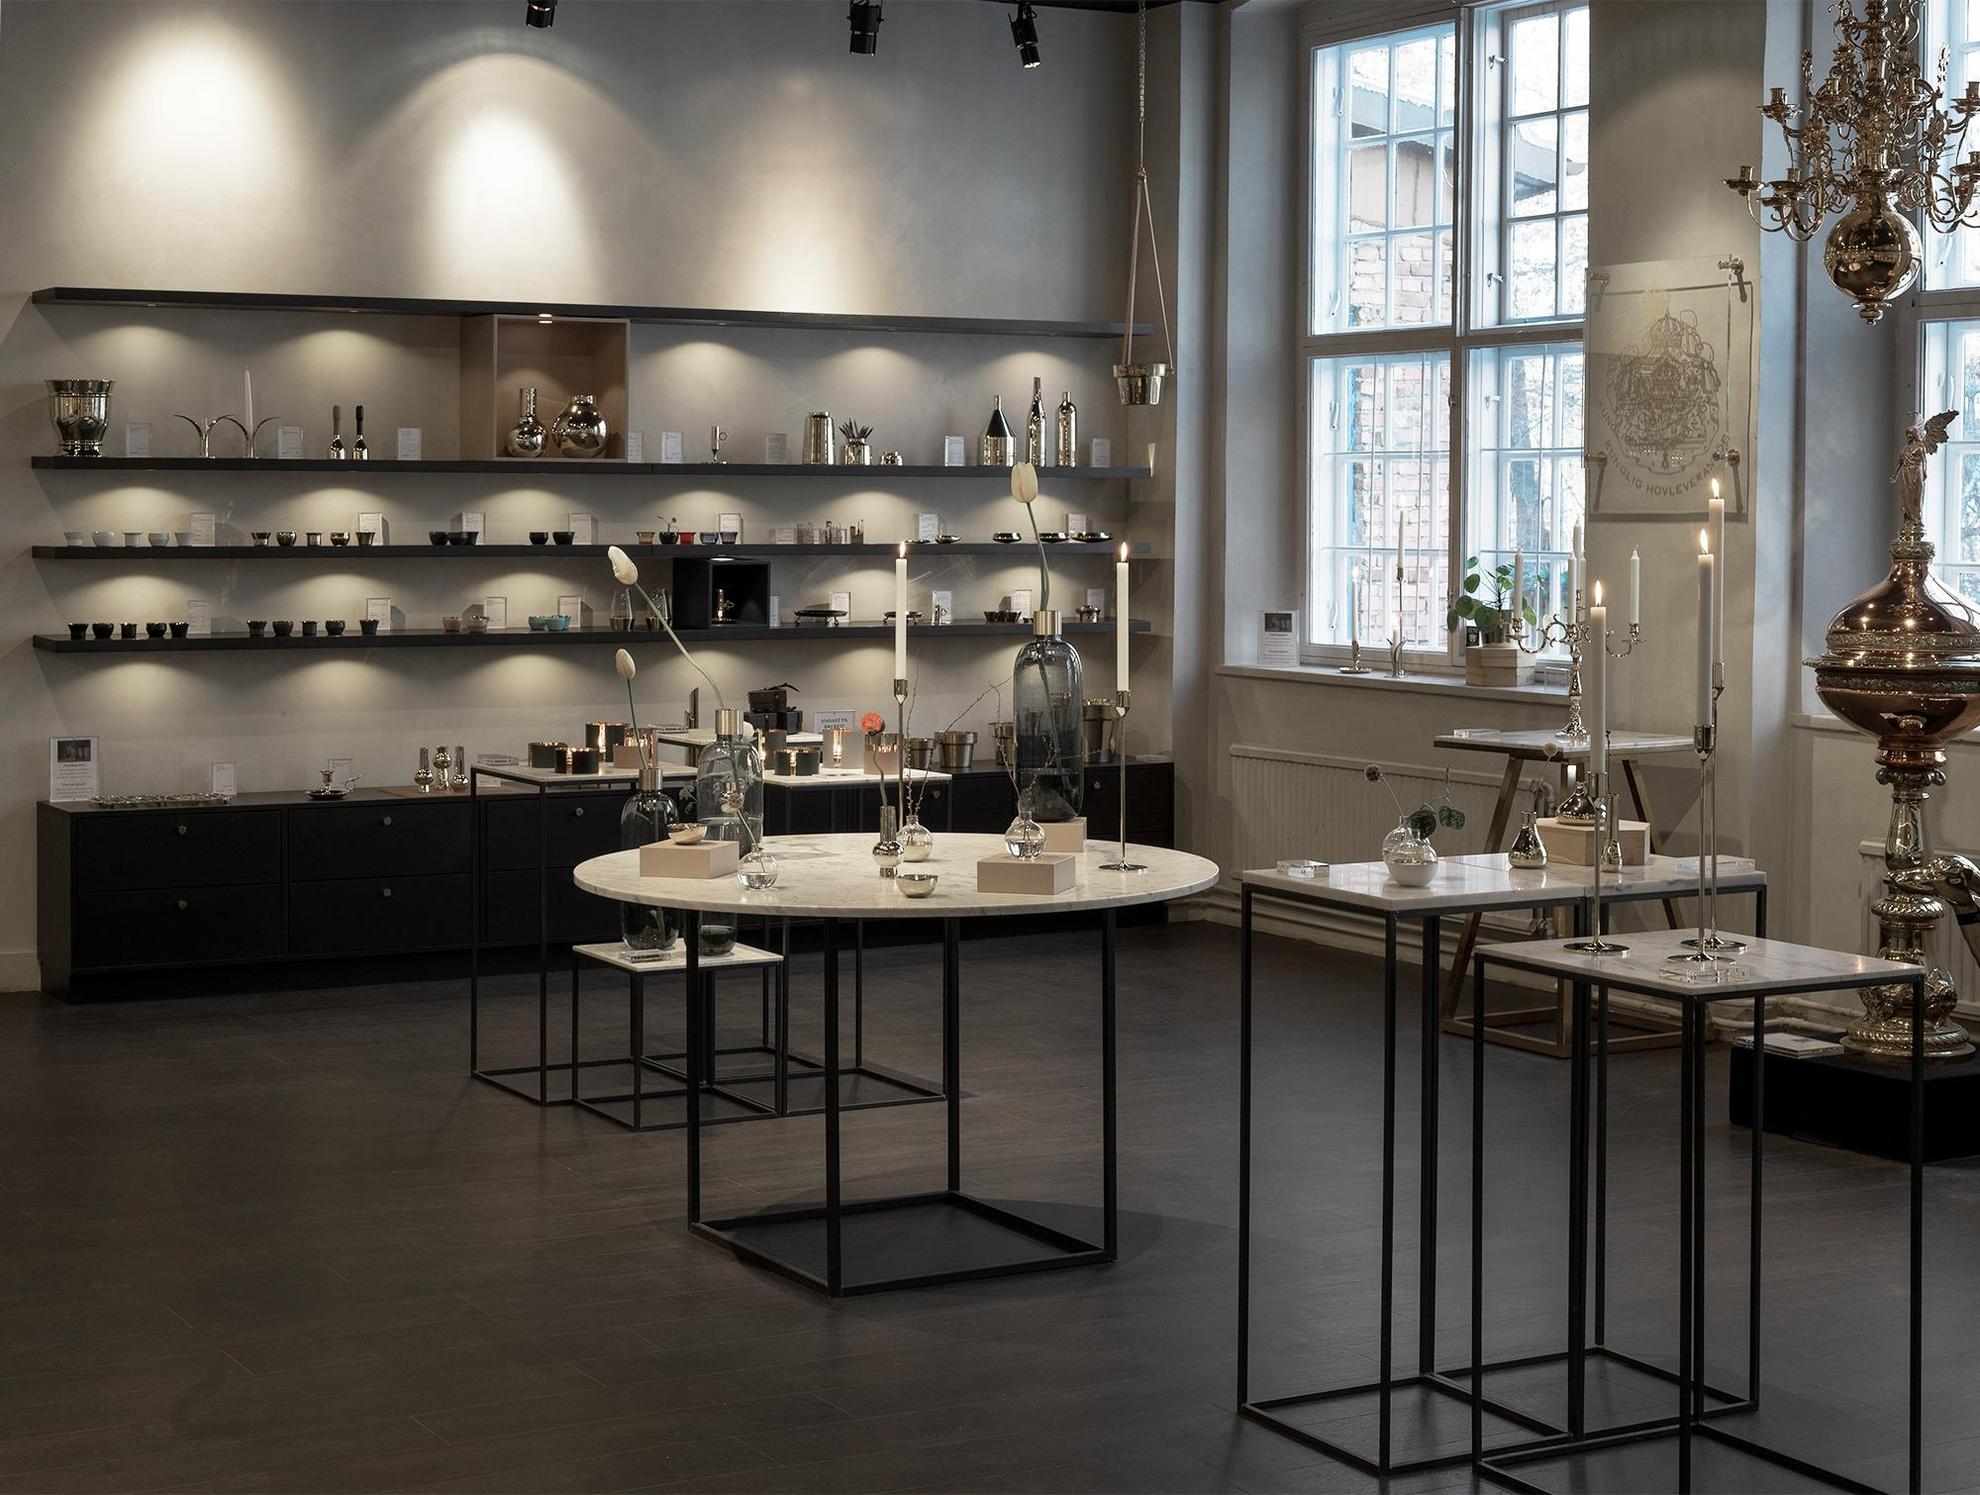 Shop interior of Skultuna Messingsbruk with black shelves and white tables where various products such as vases and candle stick are displayed.